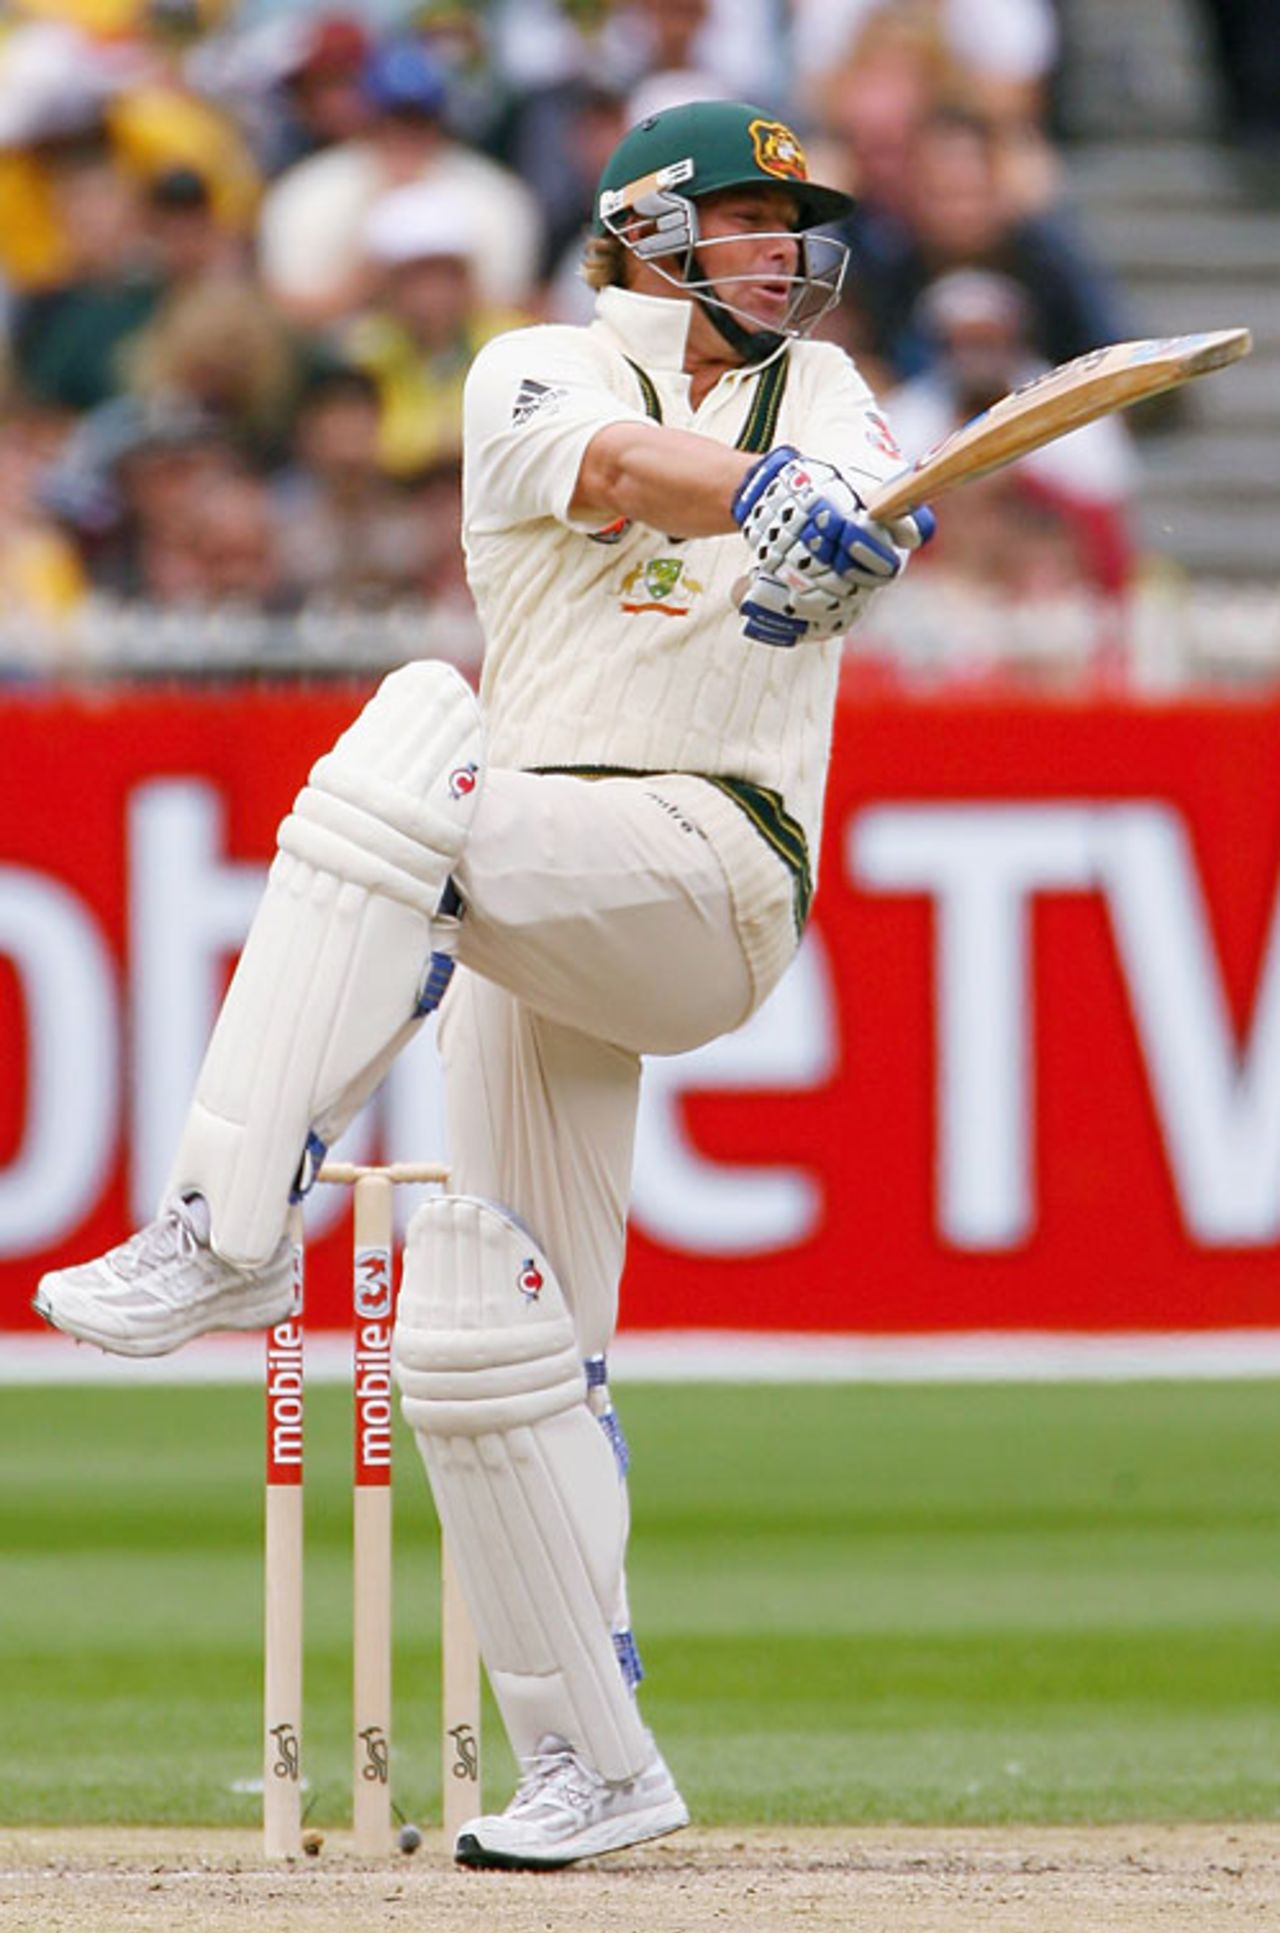 Shane Warne takes his eye off the ball and pulls, Australia v England, 4th Test, Melbourne, December 28, 2006